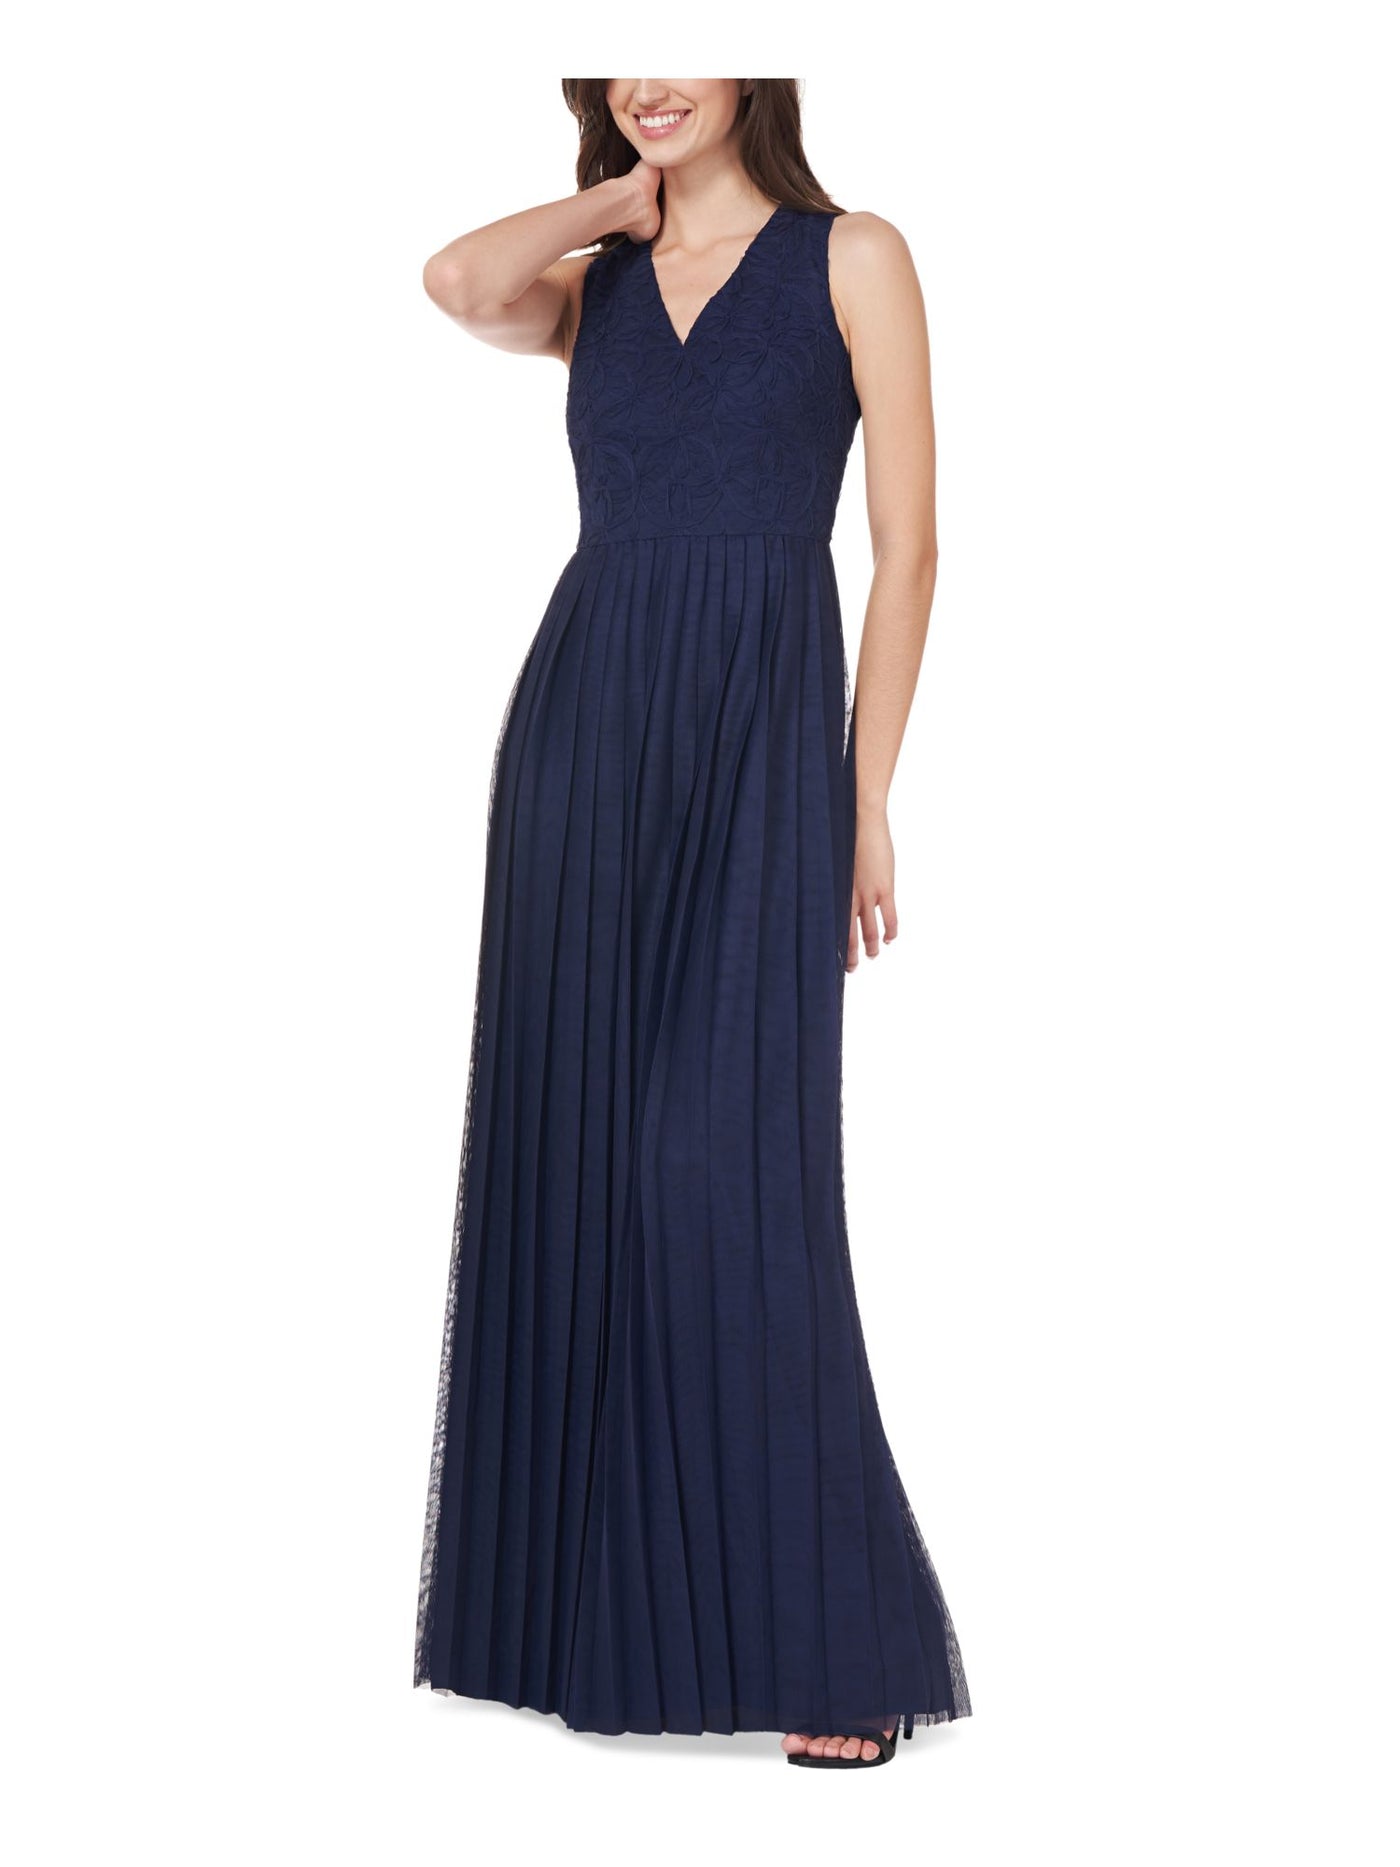 JS COLLECTION Womens Navy Zippered Pleated Sheer Lined Embellished Sleeveless V Neck Full-Length Formal Gown Dress 12